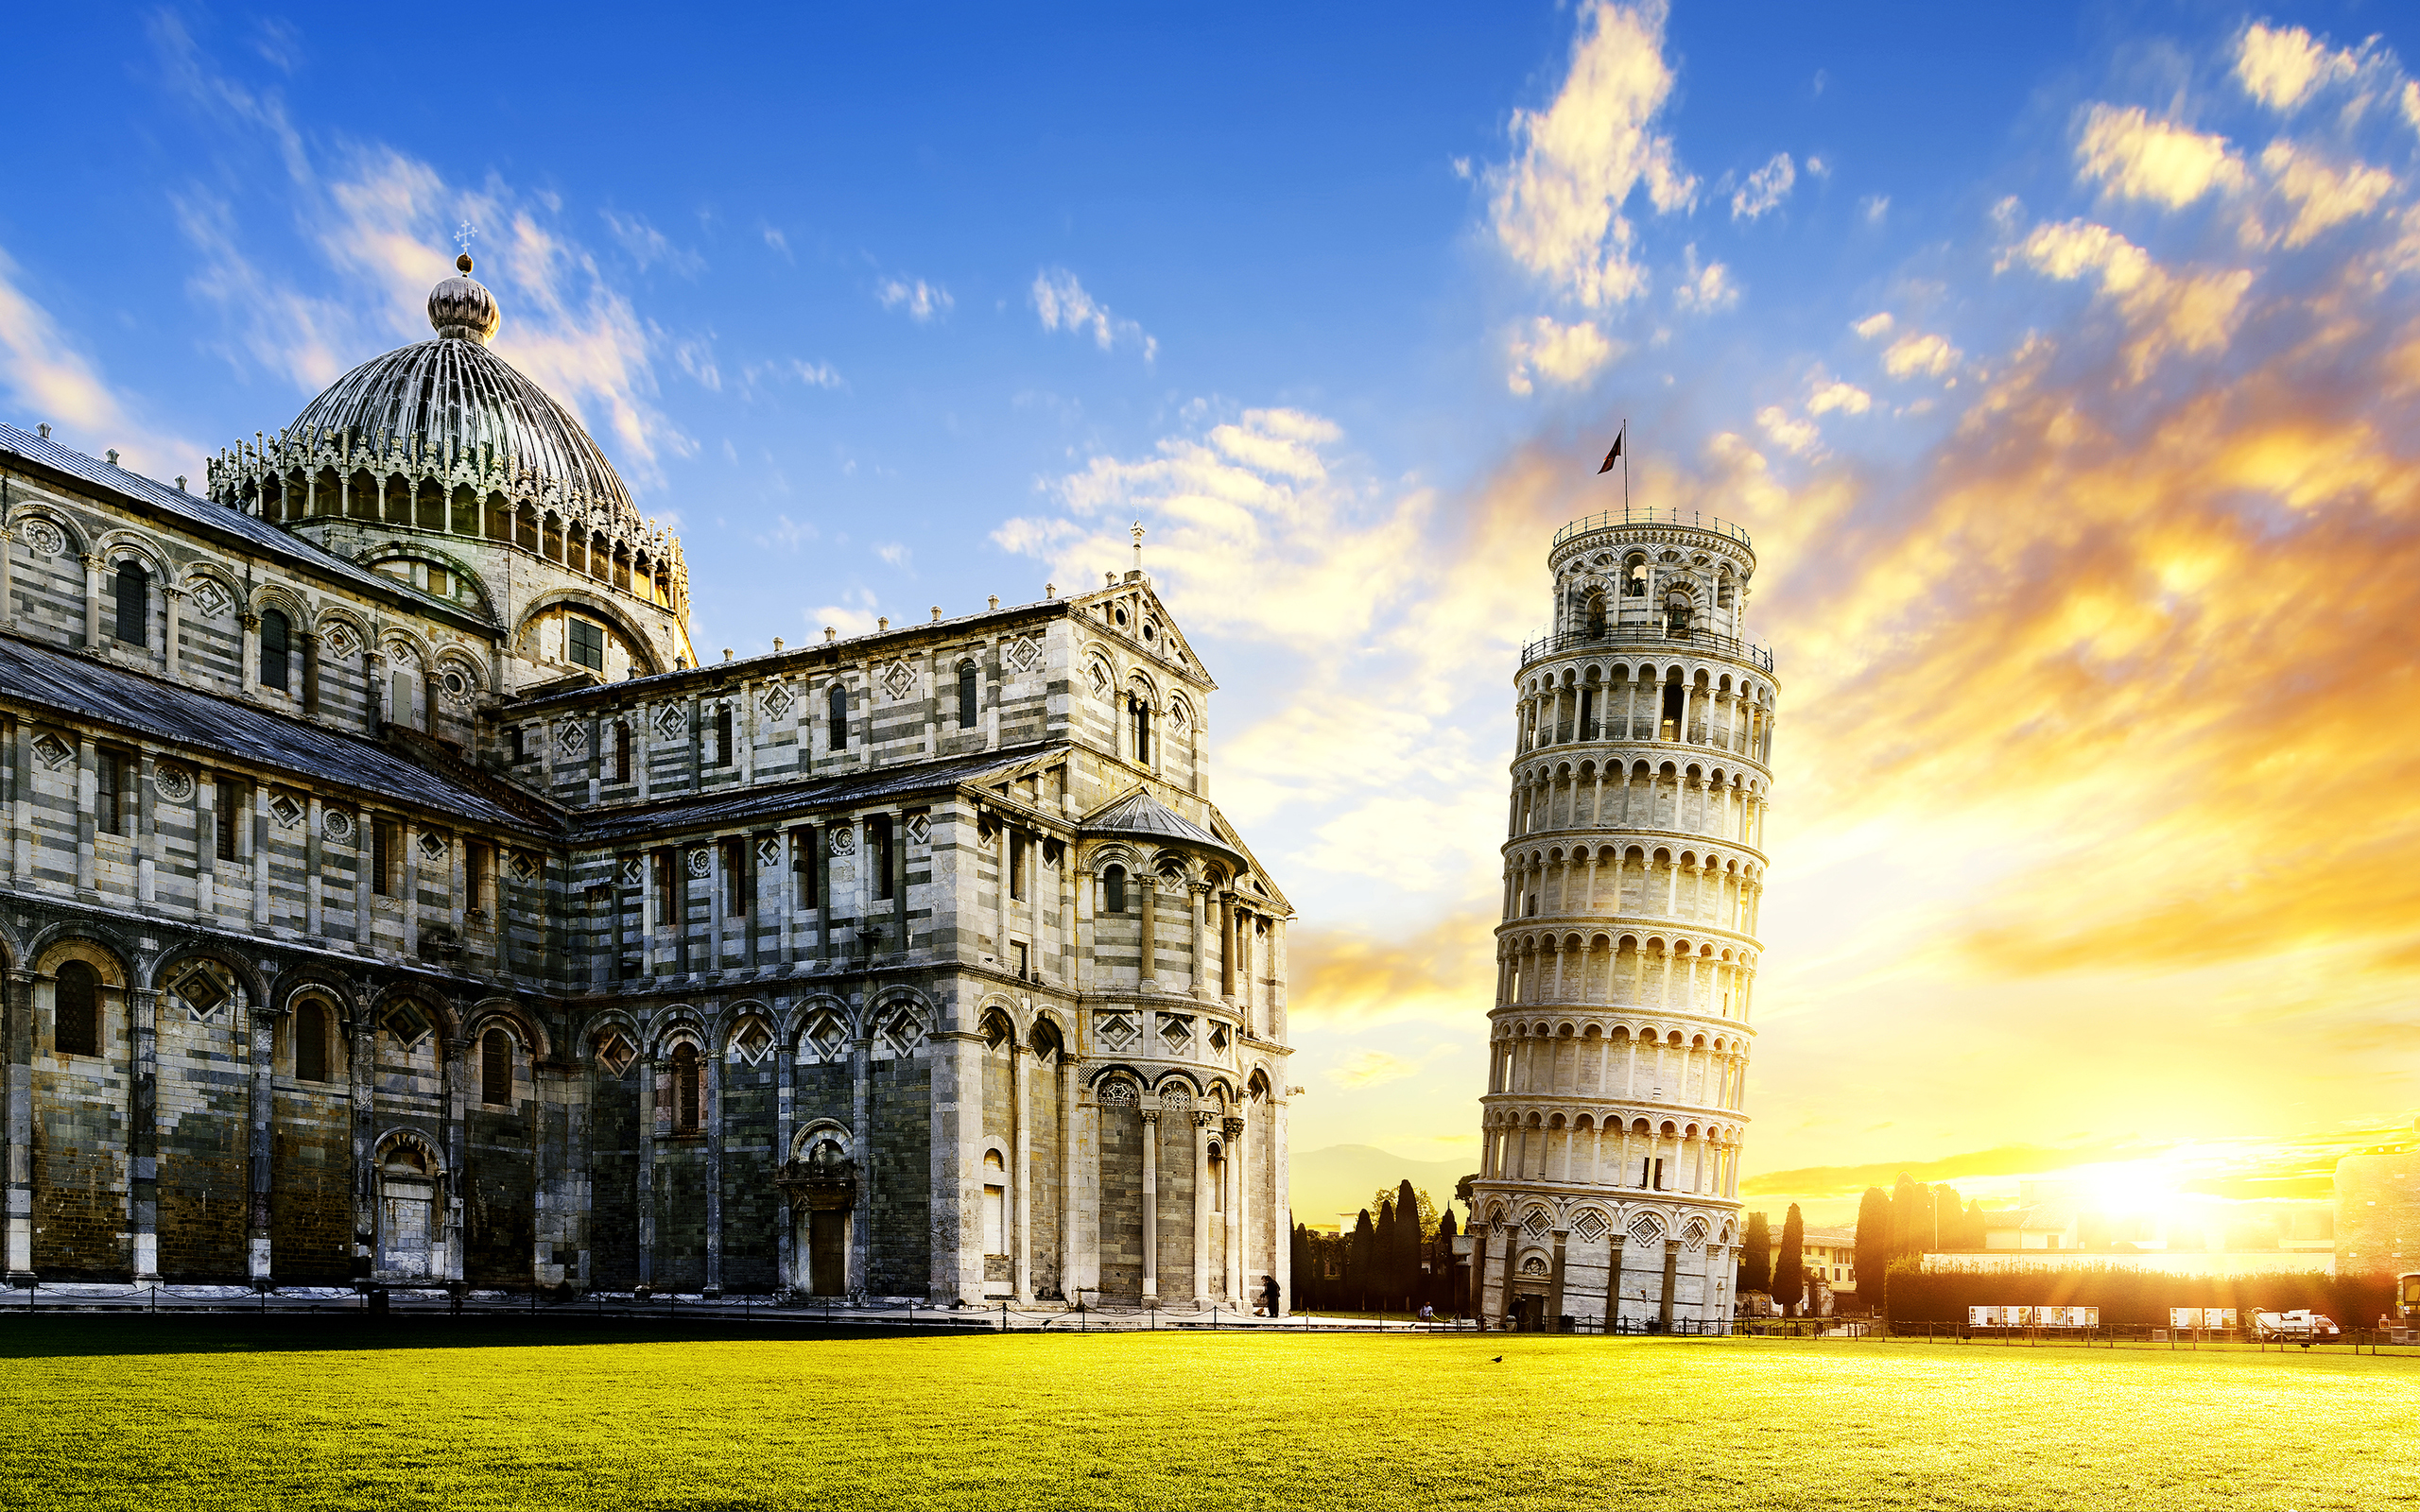 italy, man made, leaning tower of pisa, pisa, monuments